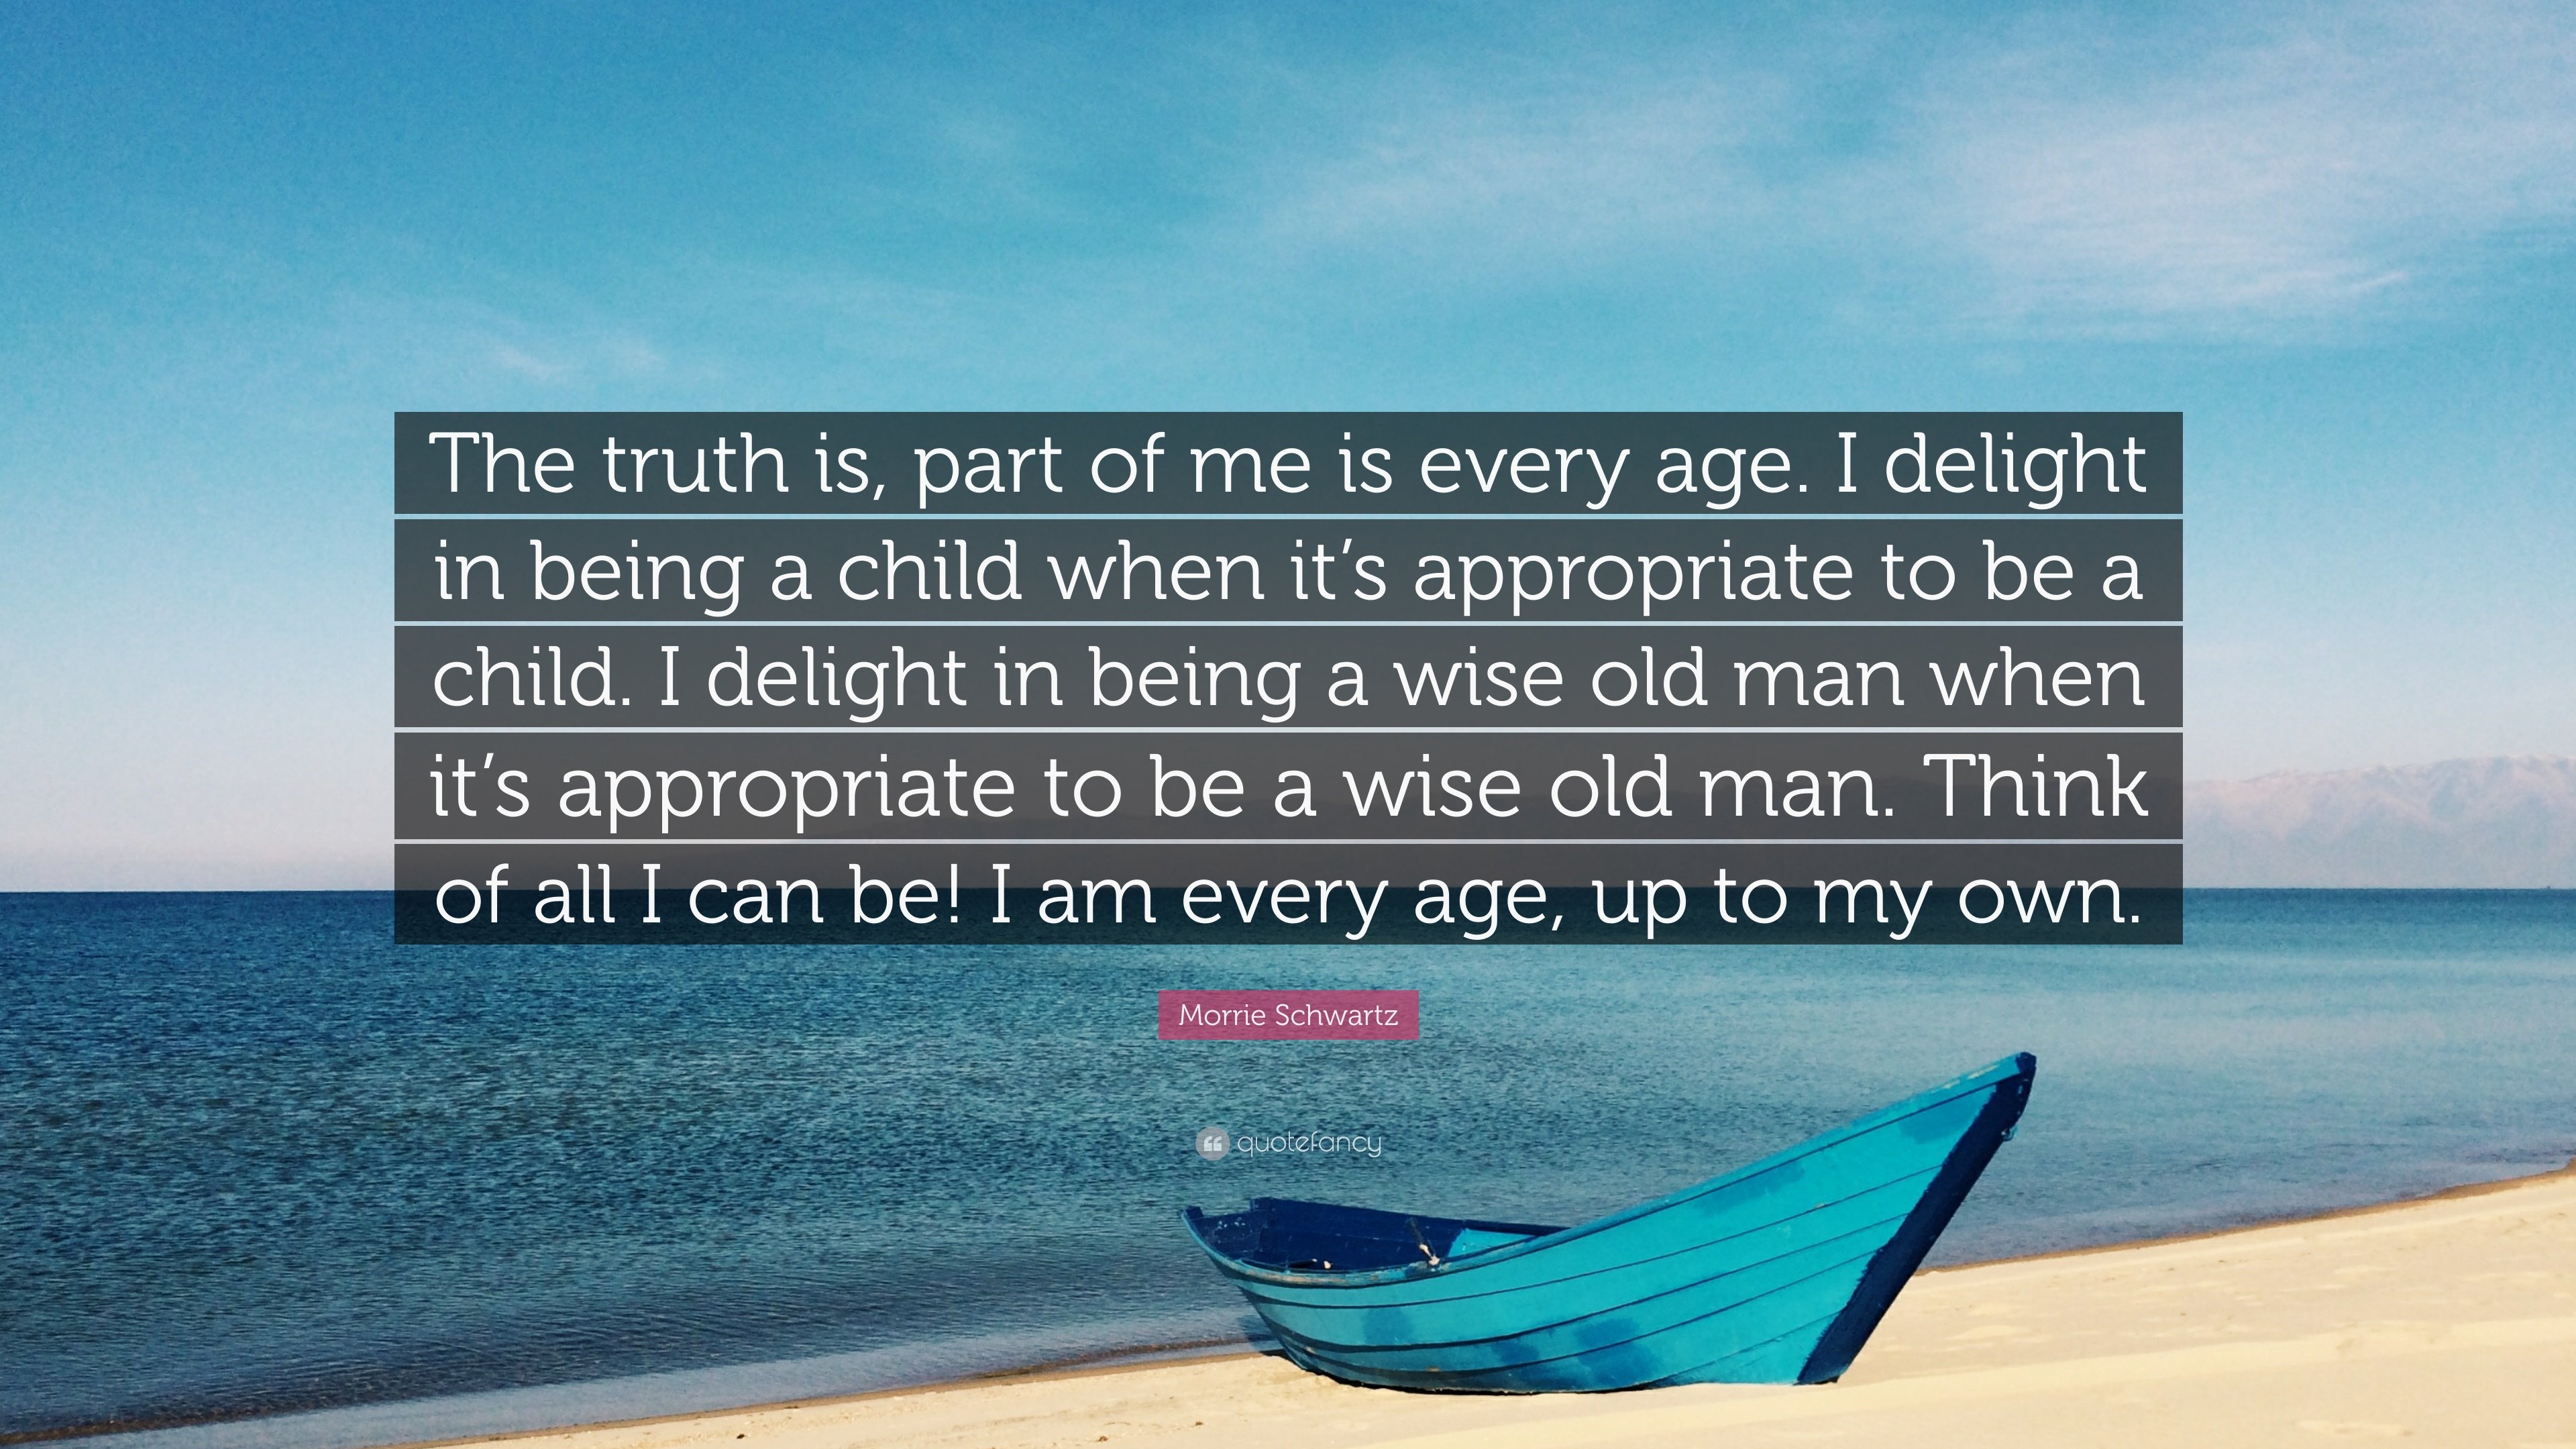 Morrie Schwartz Quote: “The truth is, part of me is every age. I